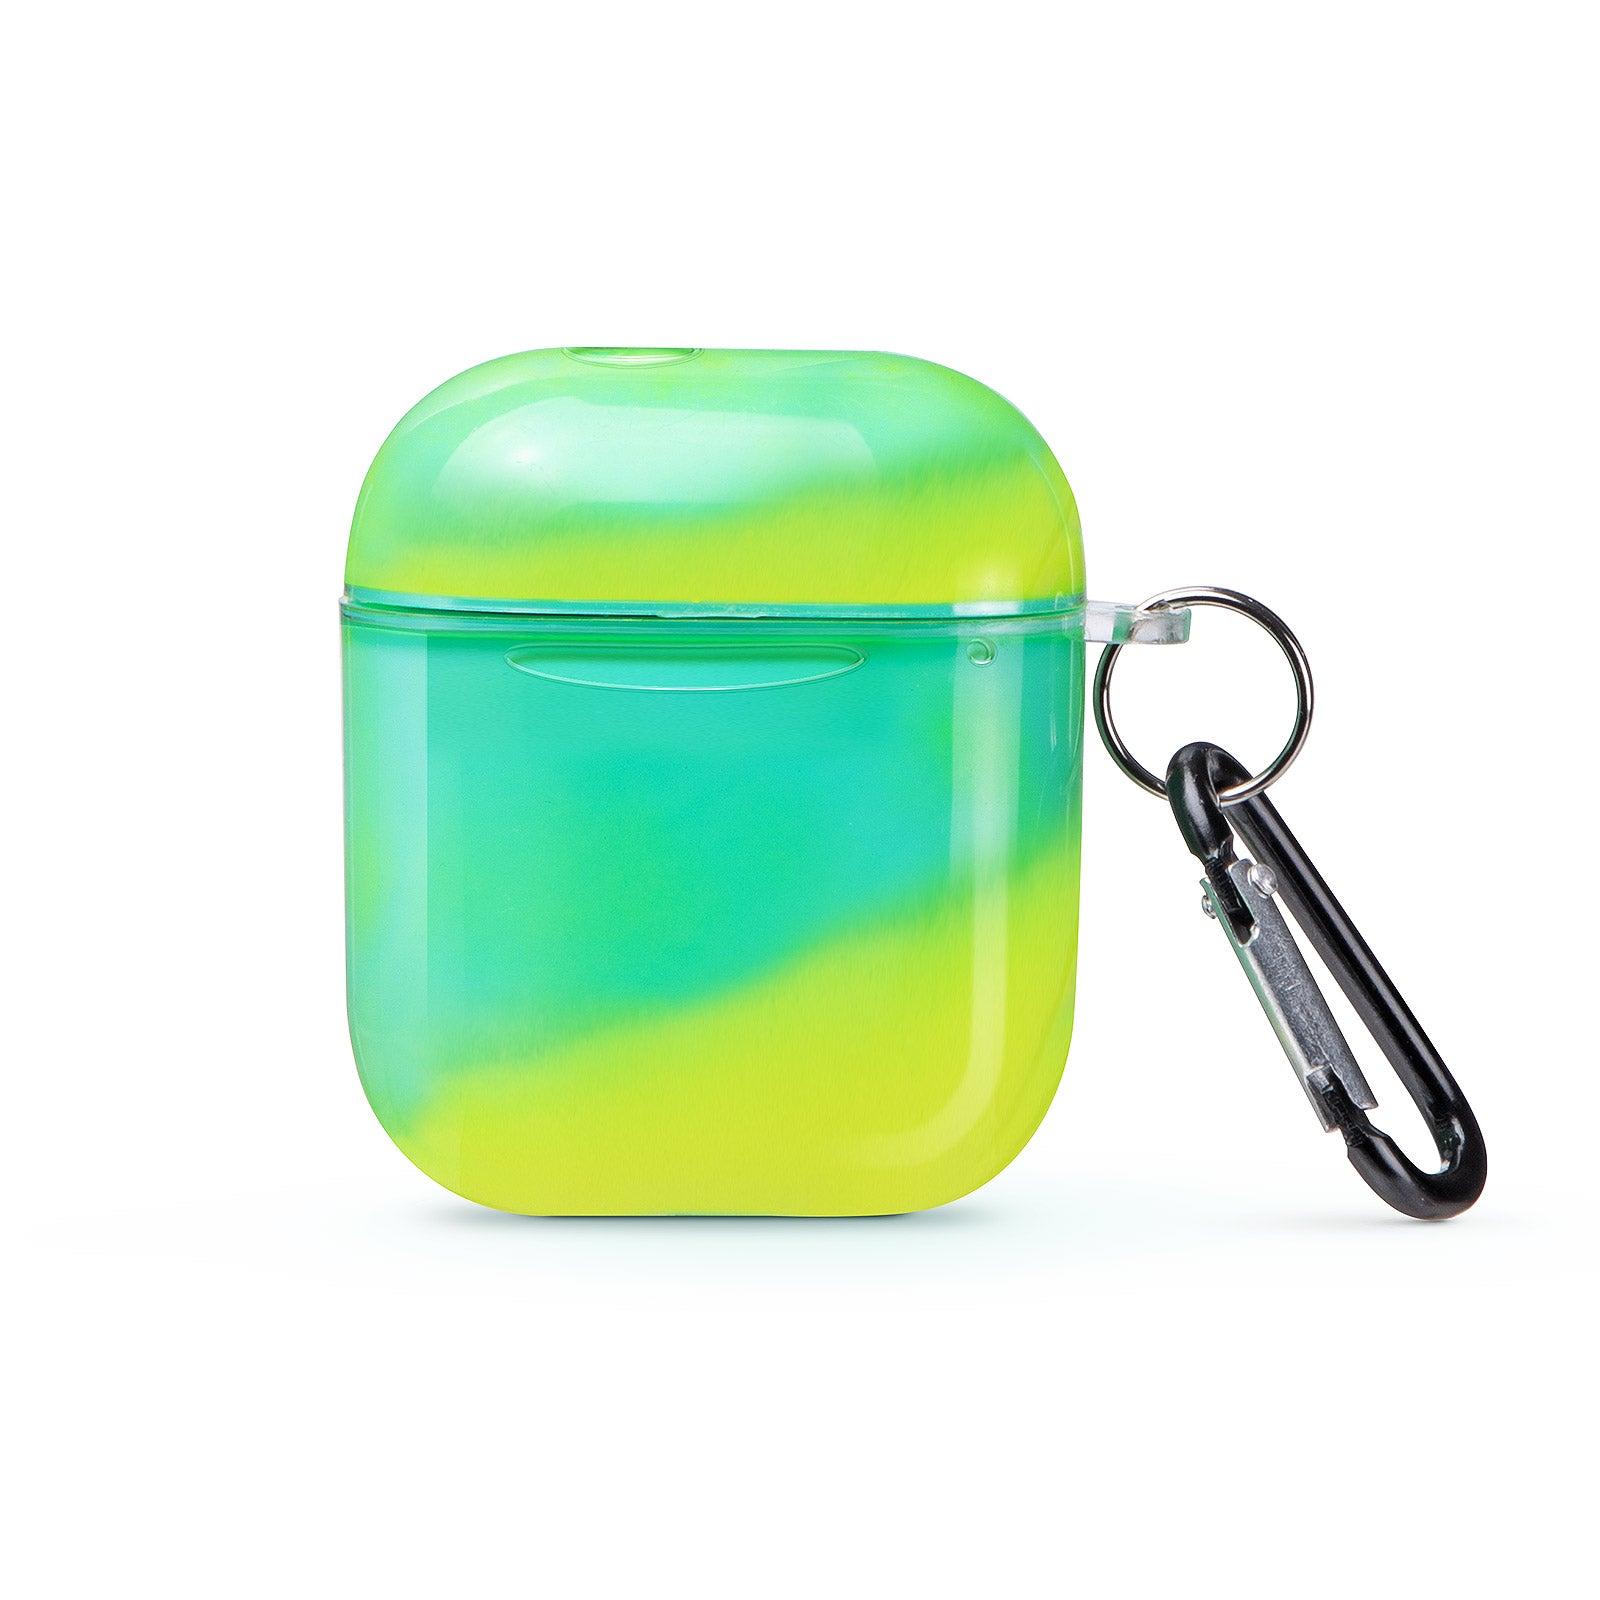 Turquoise Gradient AirPods Case